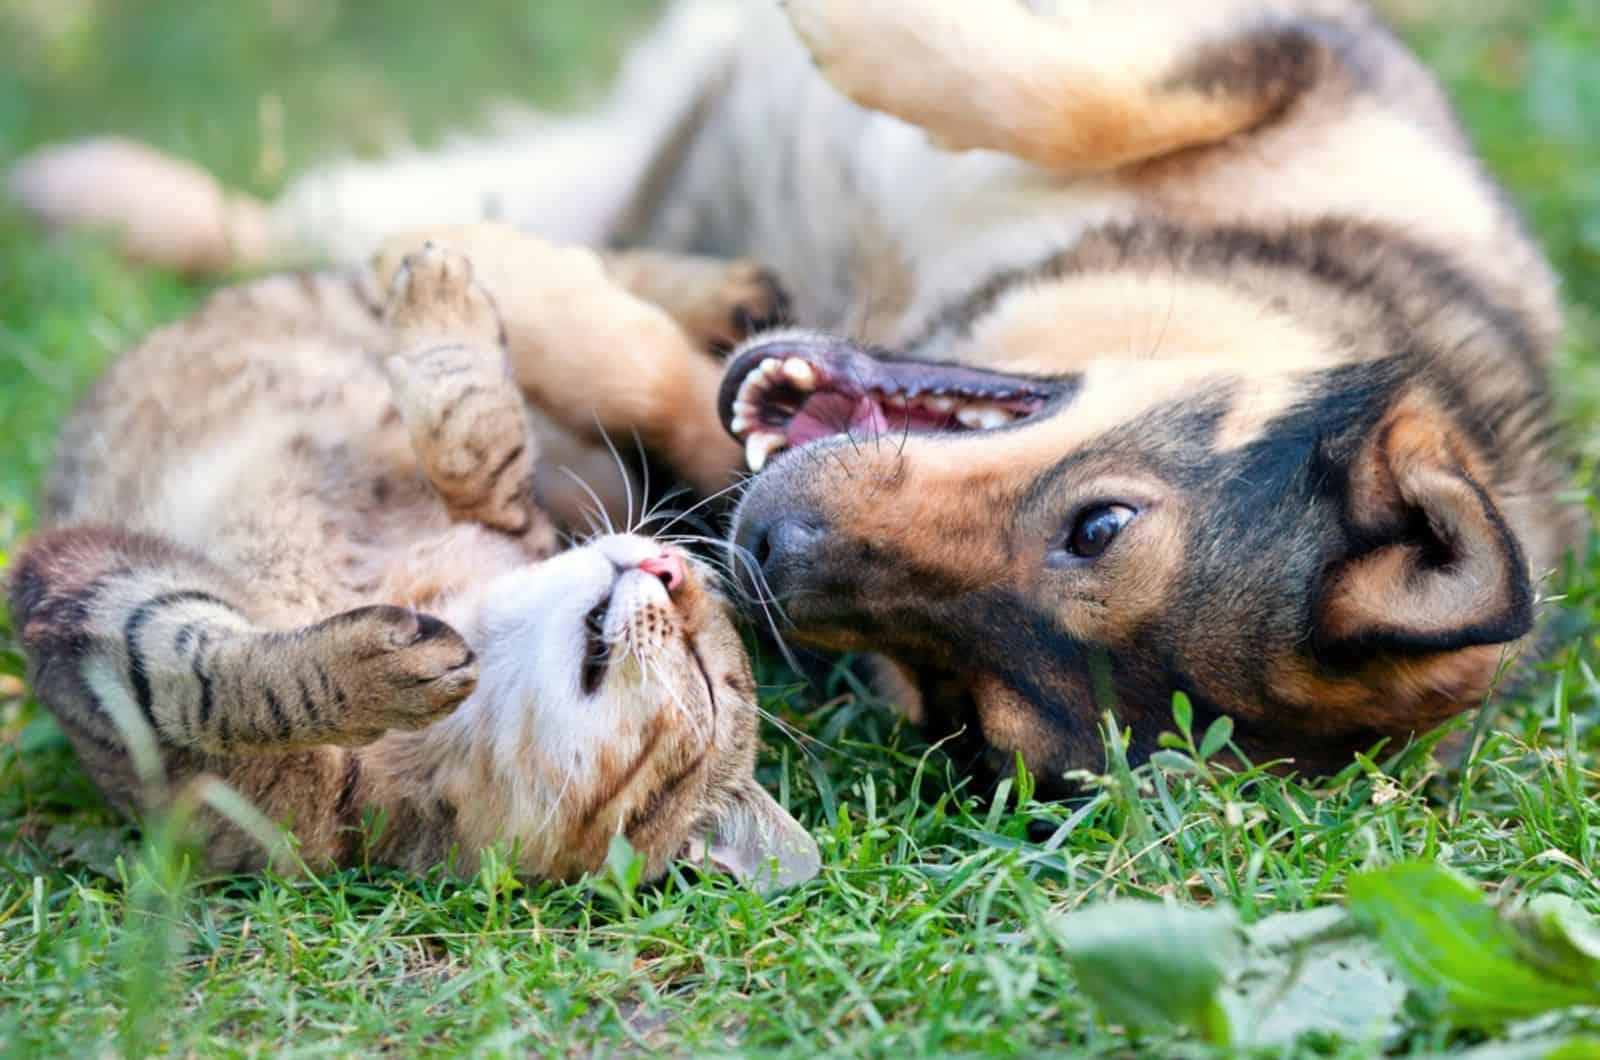 dog and cat playing together on the grass